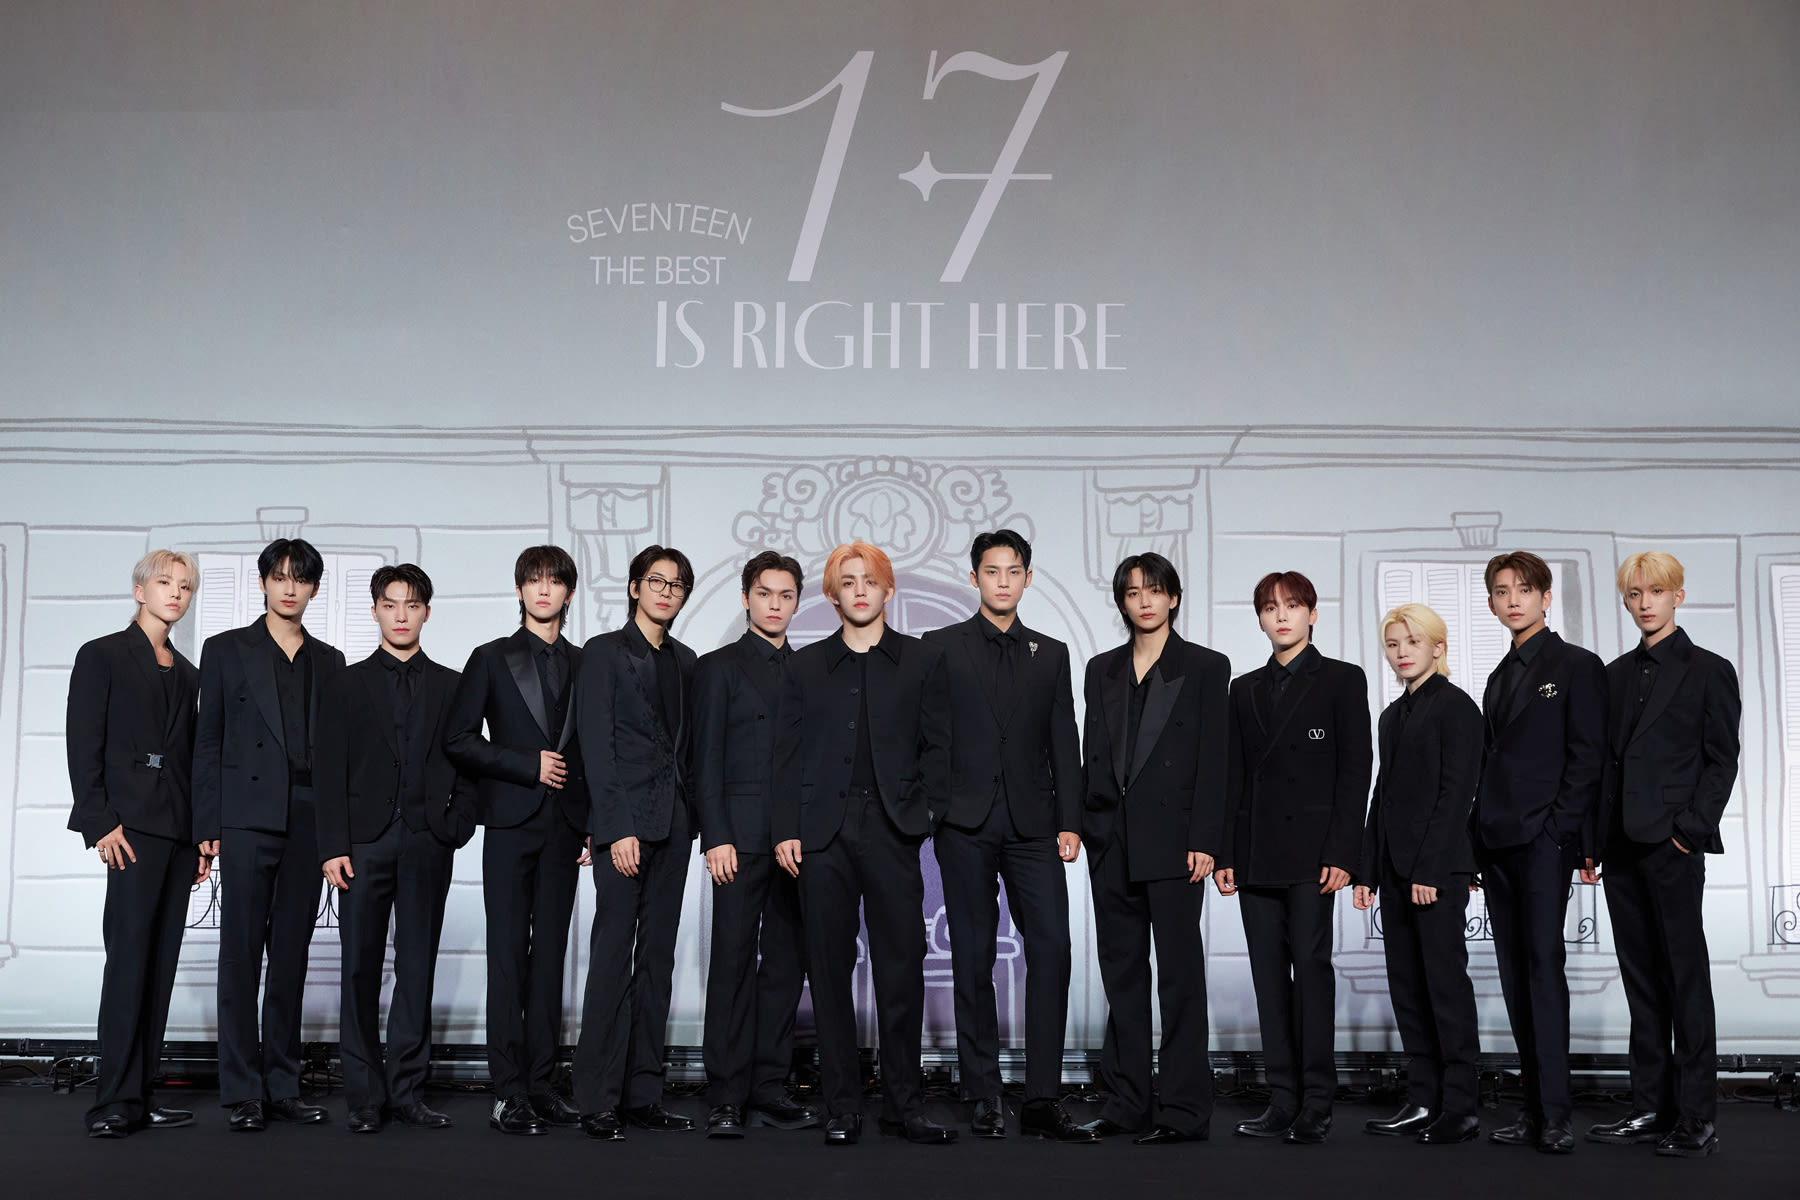 SEVENTEEN on Wrapping Their Tour, New Music, and What’s Next